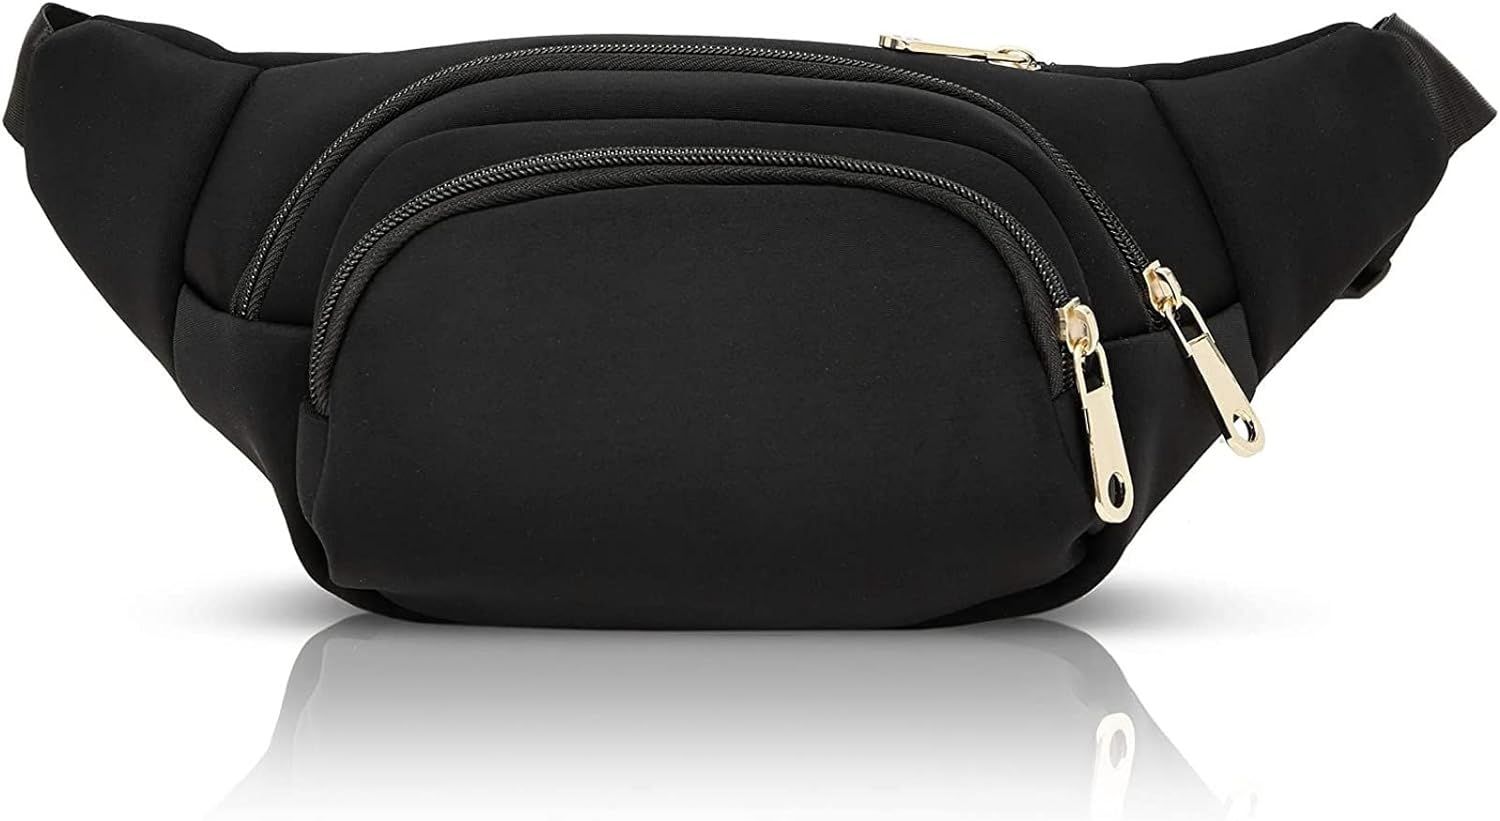 Zodaca Black Plus Size Fanny Pack for Women and Men, Fashion Crossbody Bag with Adjustable Waist ... | Amazon (US)